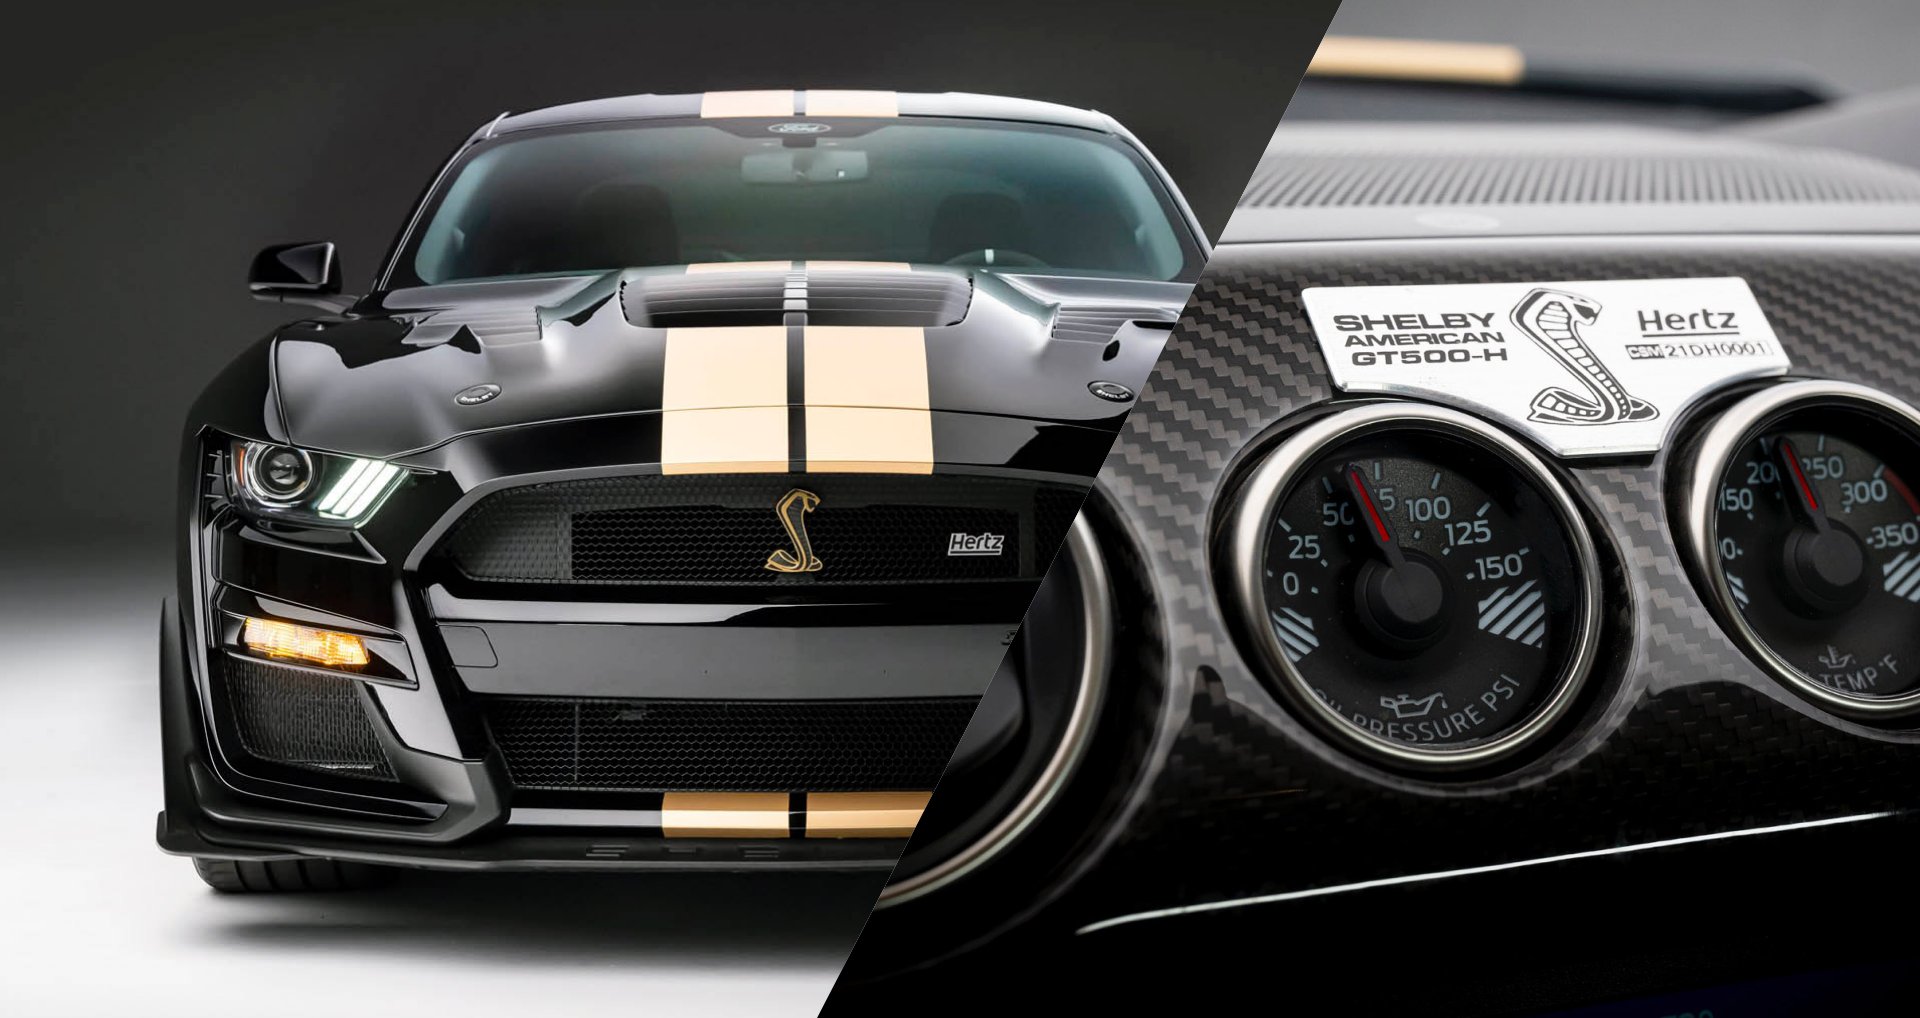 Ford Mustang Shelby GT500-H